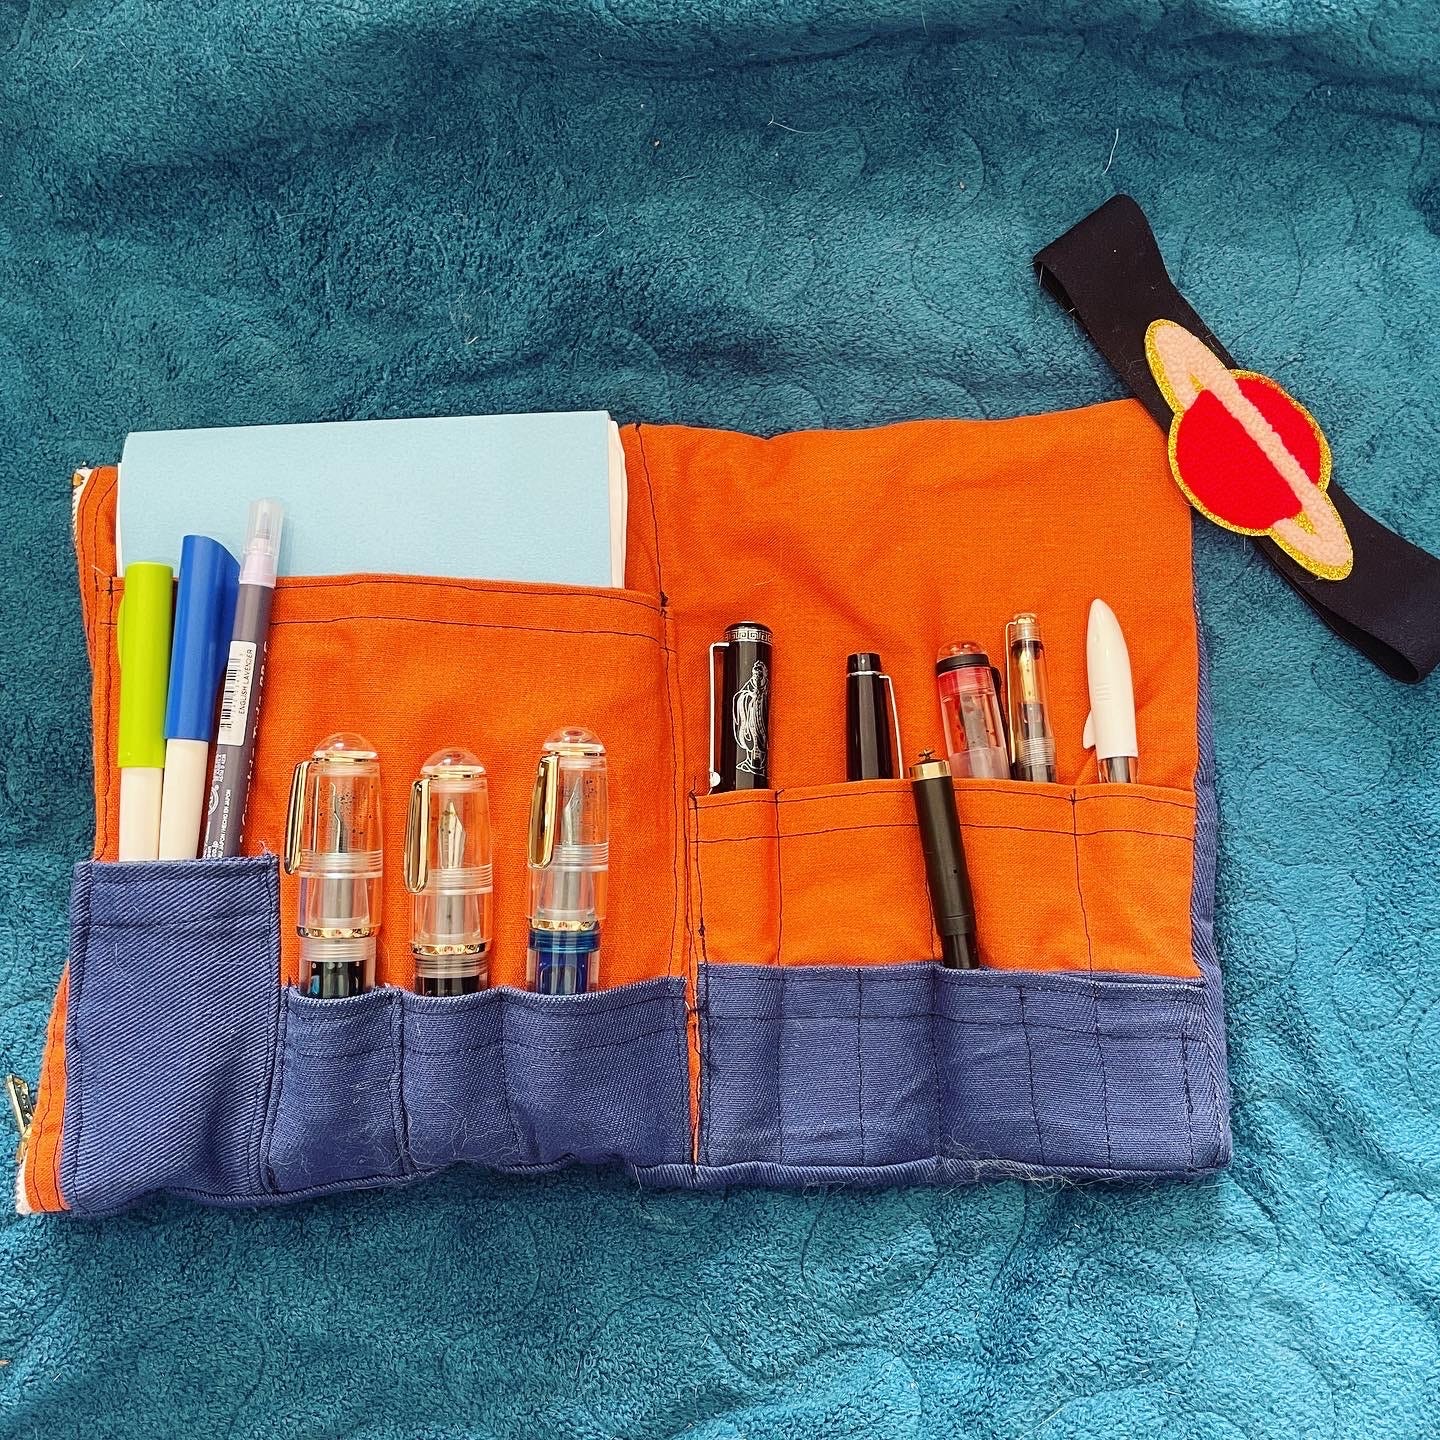 TINKERINK: MAKING A PEN DISPLAY, The Pencilcase Blog